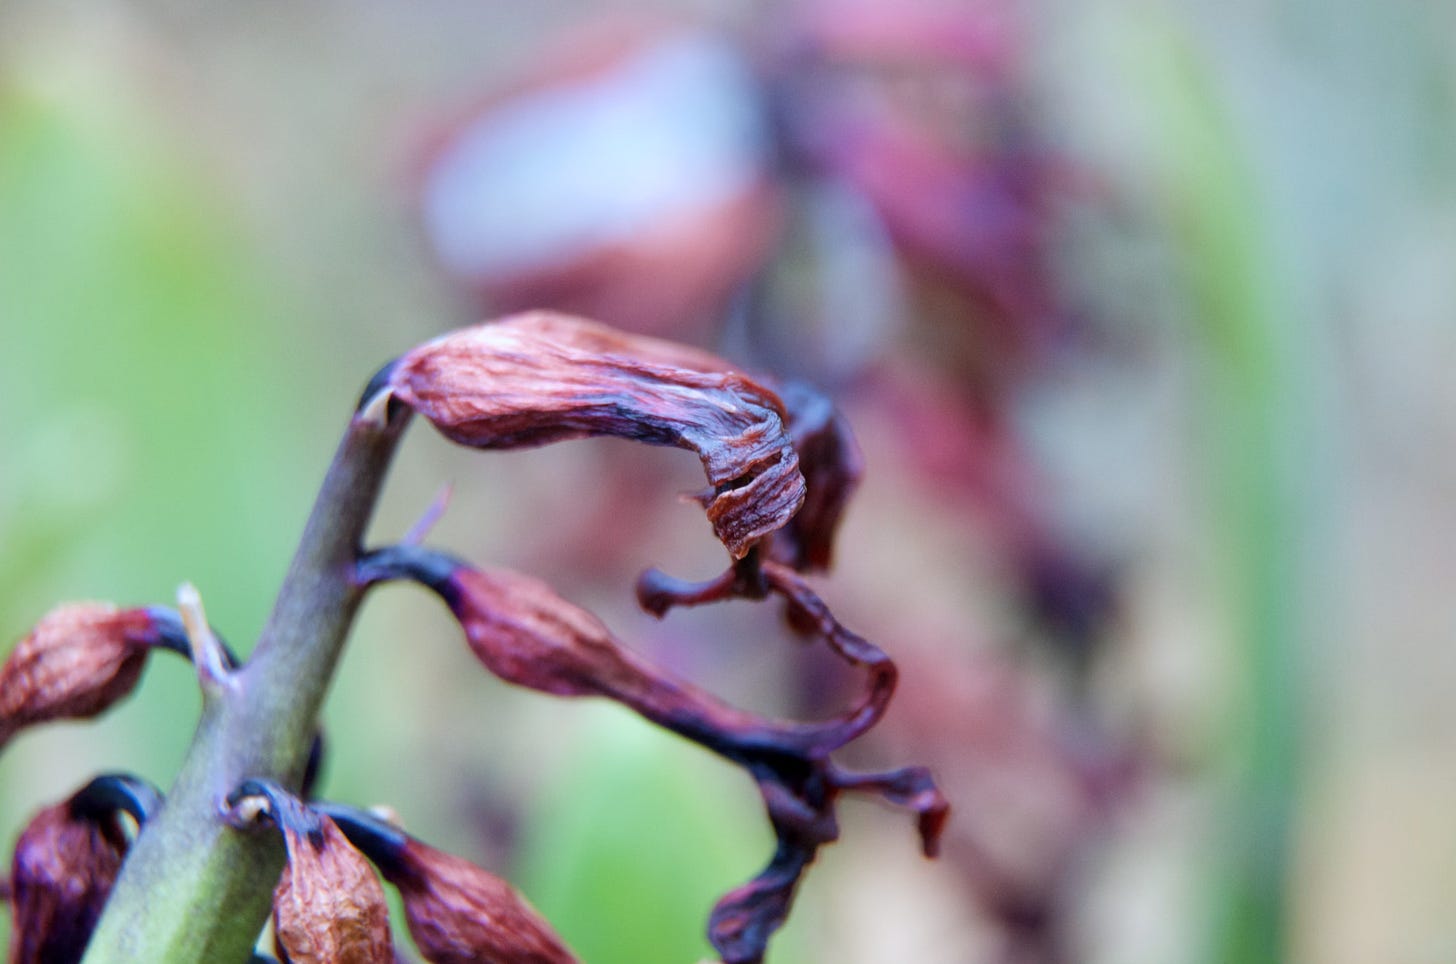 A spent hyacinth bloom is softly elegant in a maroon spiral in evening light.